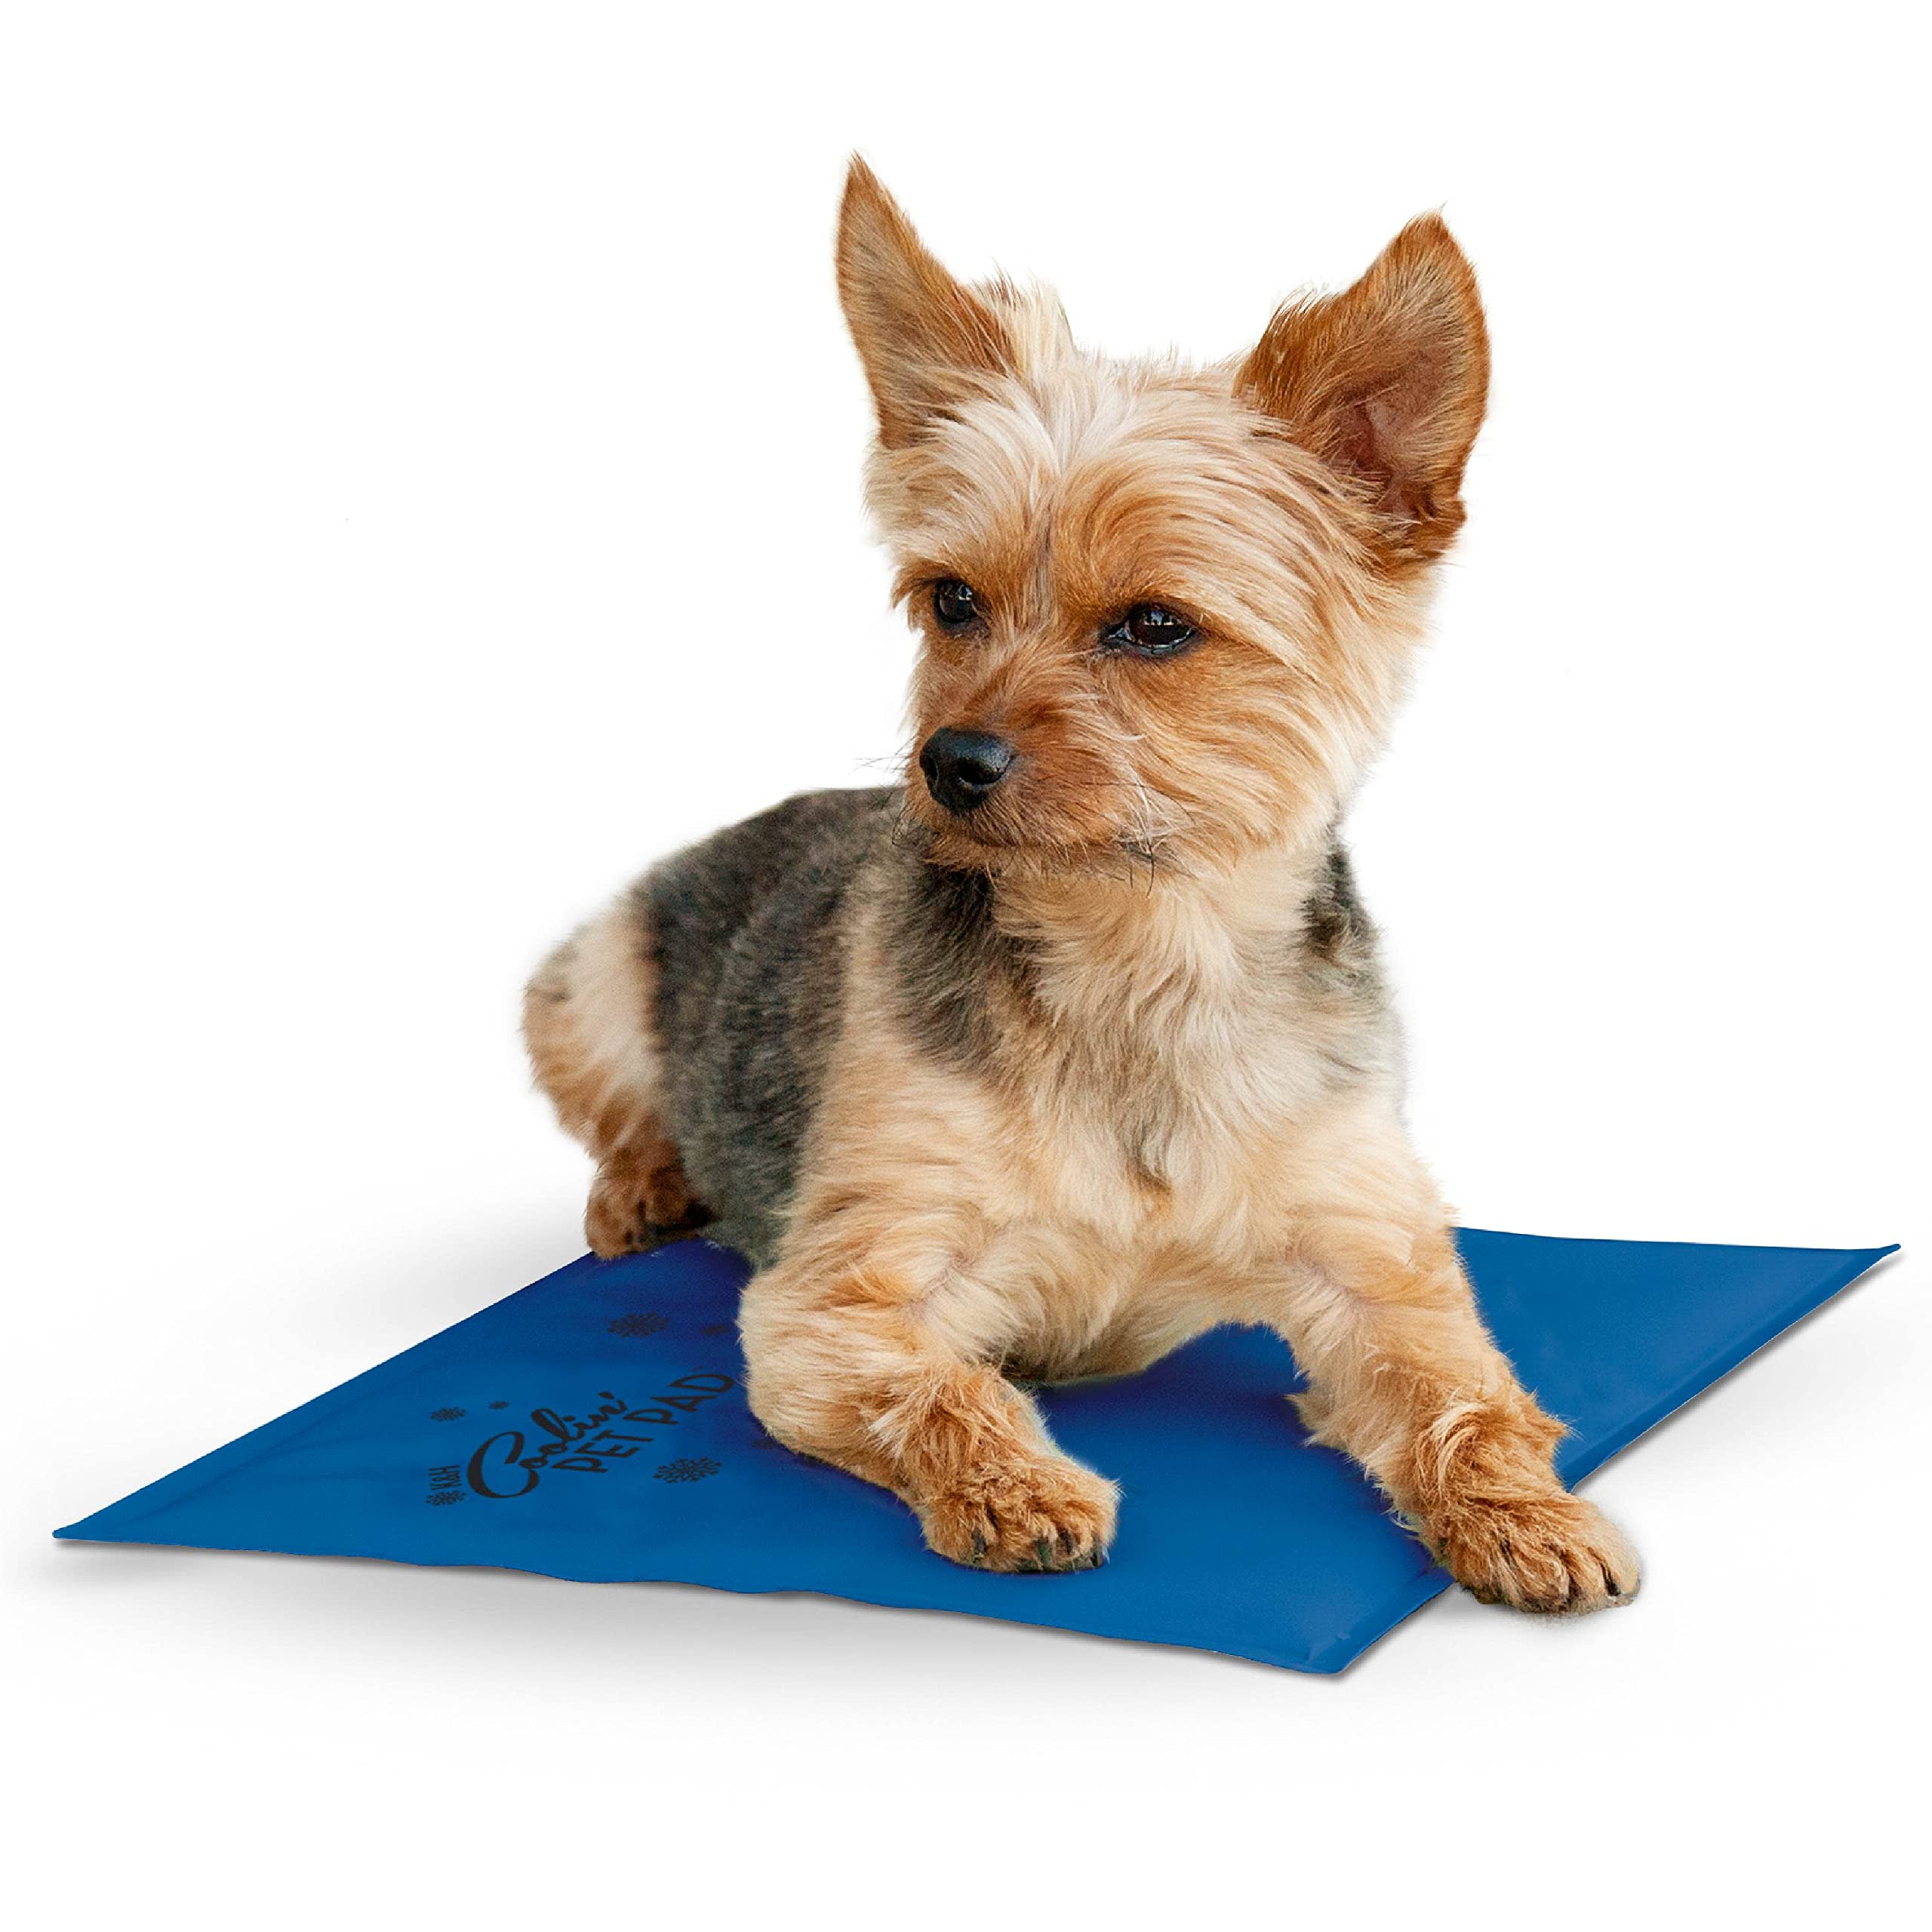 Amazon has pet cooling beds on sale, 72% off for the XL. 17.25 plus tax